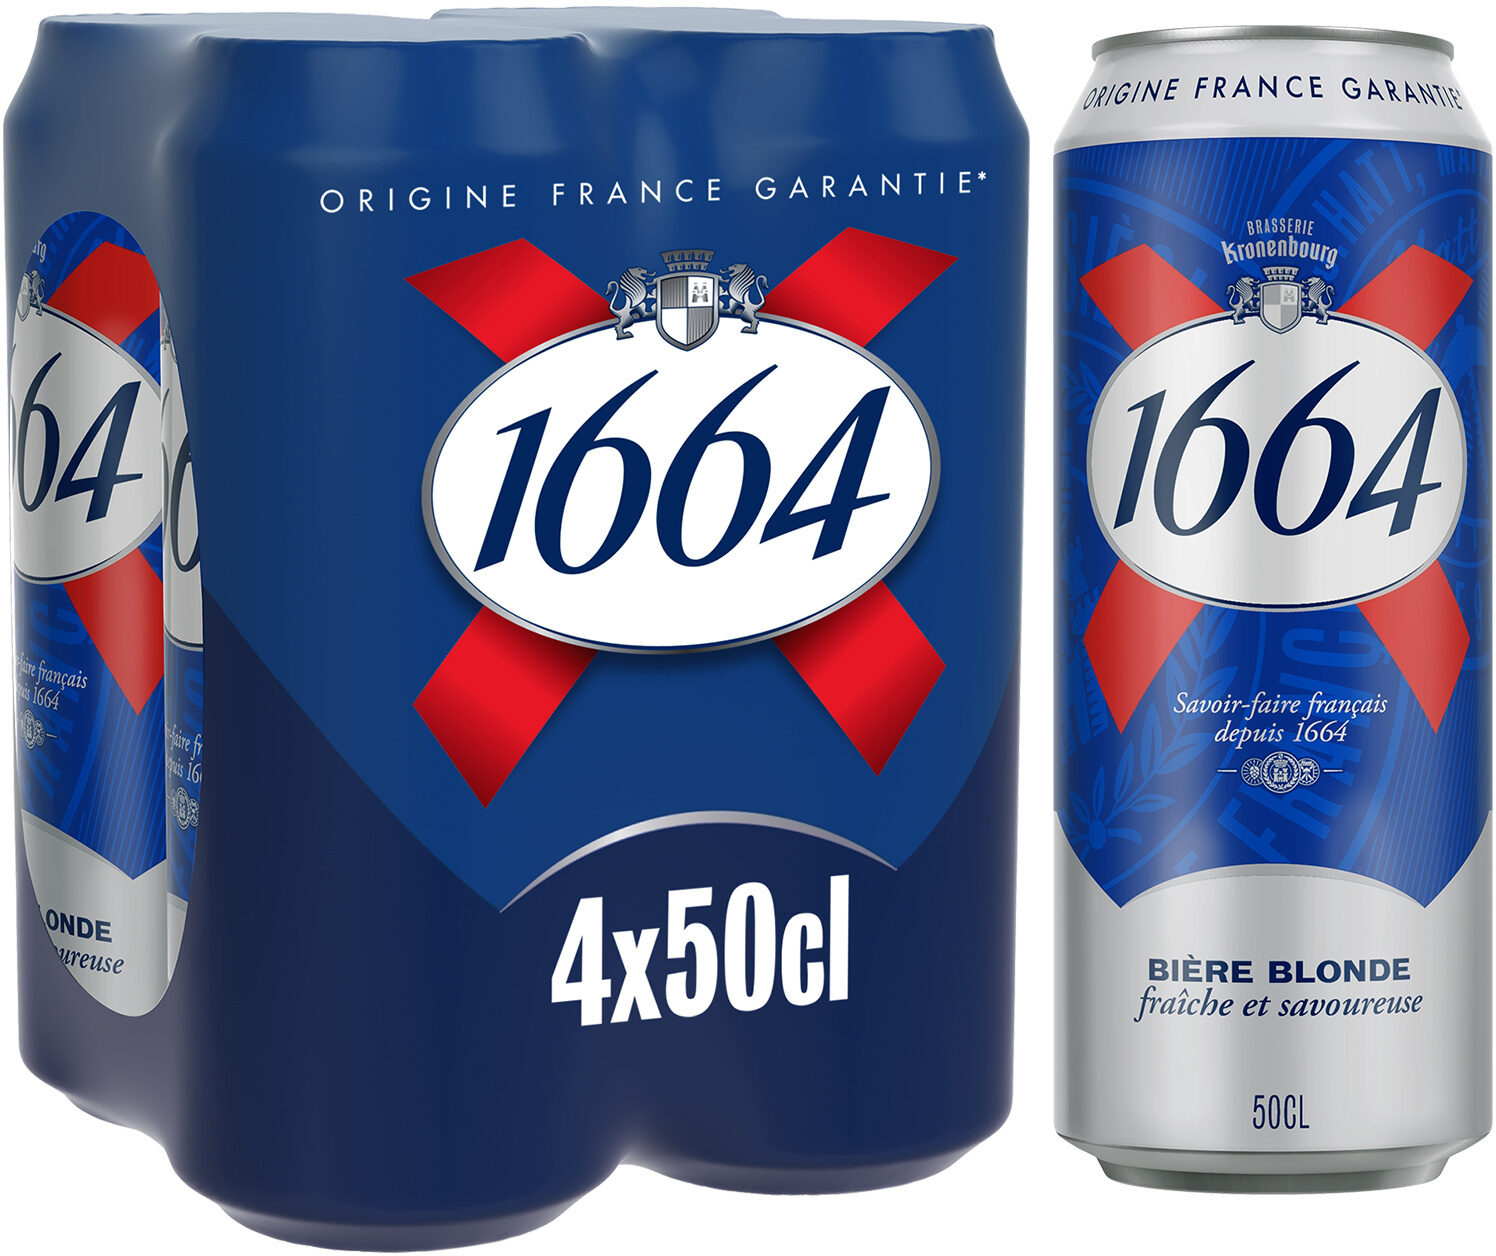 1664 4x50cl boite 1664 5.5 degre alcool - Product - fr